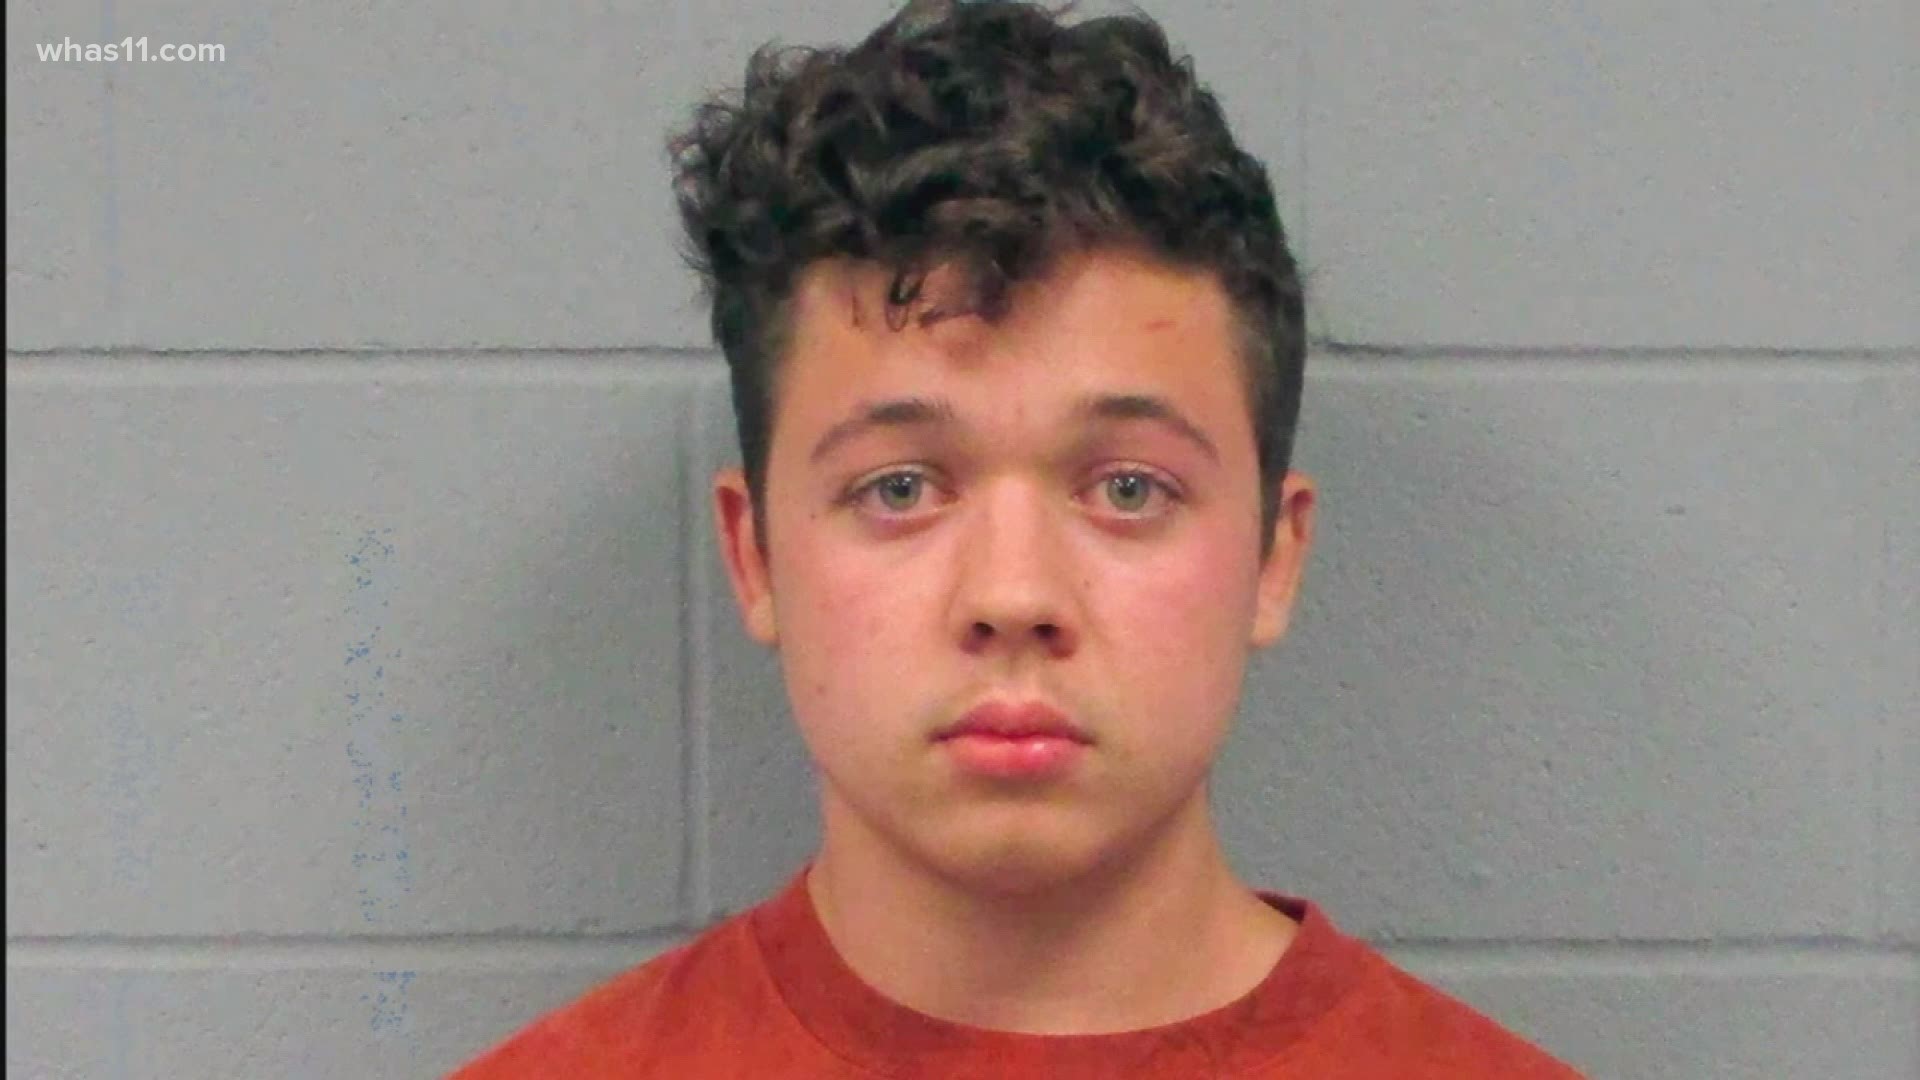 Prosecutors say Rittenhouse, 17 at the time shot and killed two people and wounded a third in August after traveling from his home in Antioch, Illinois, to Kenosha.